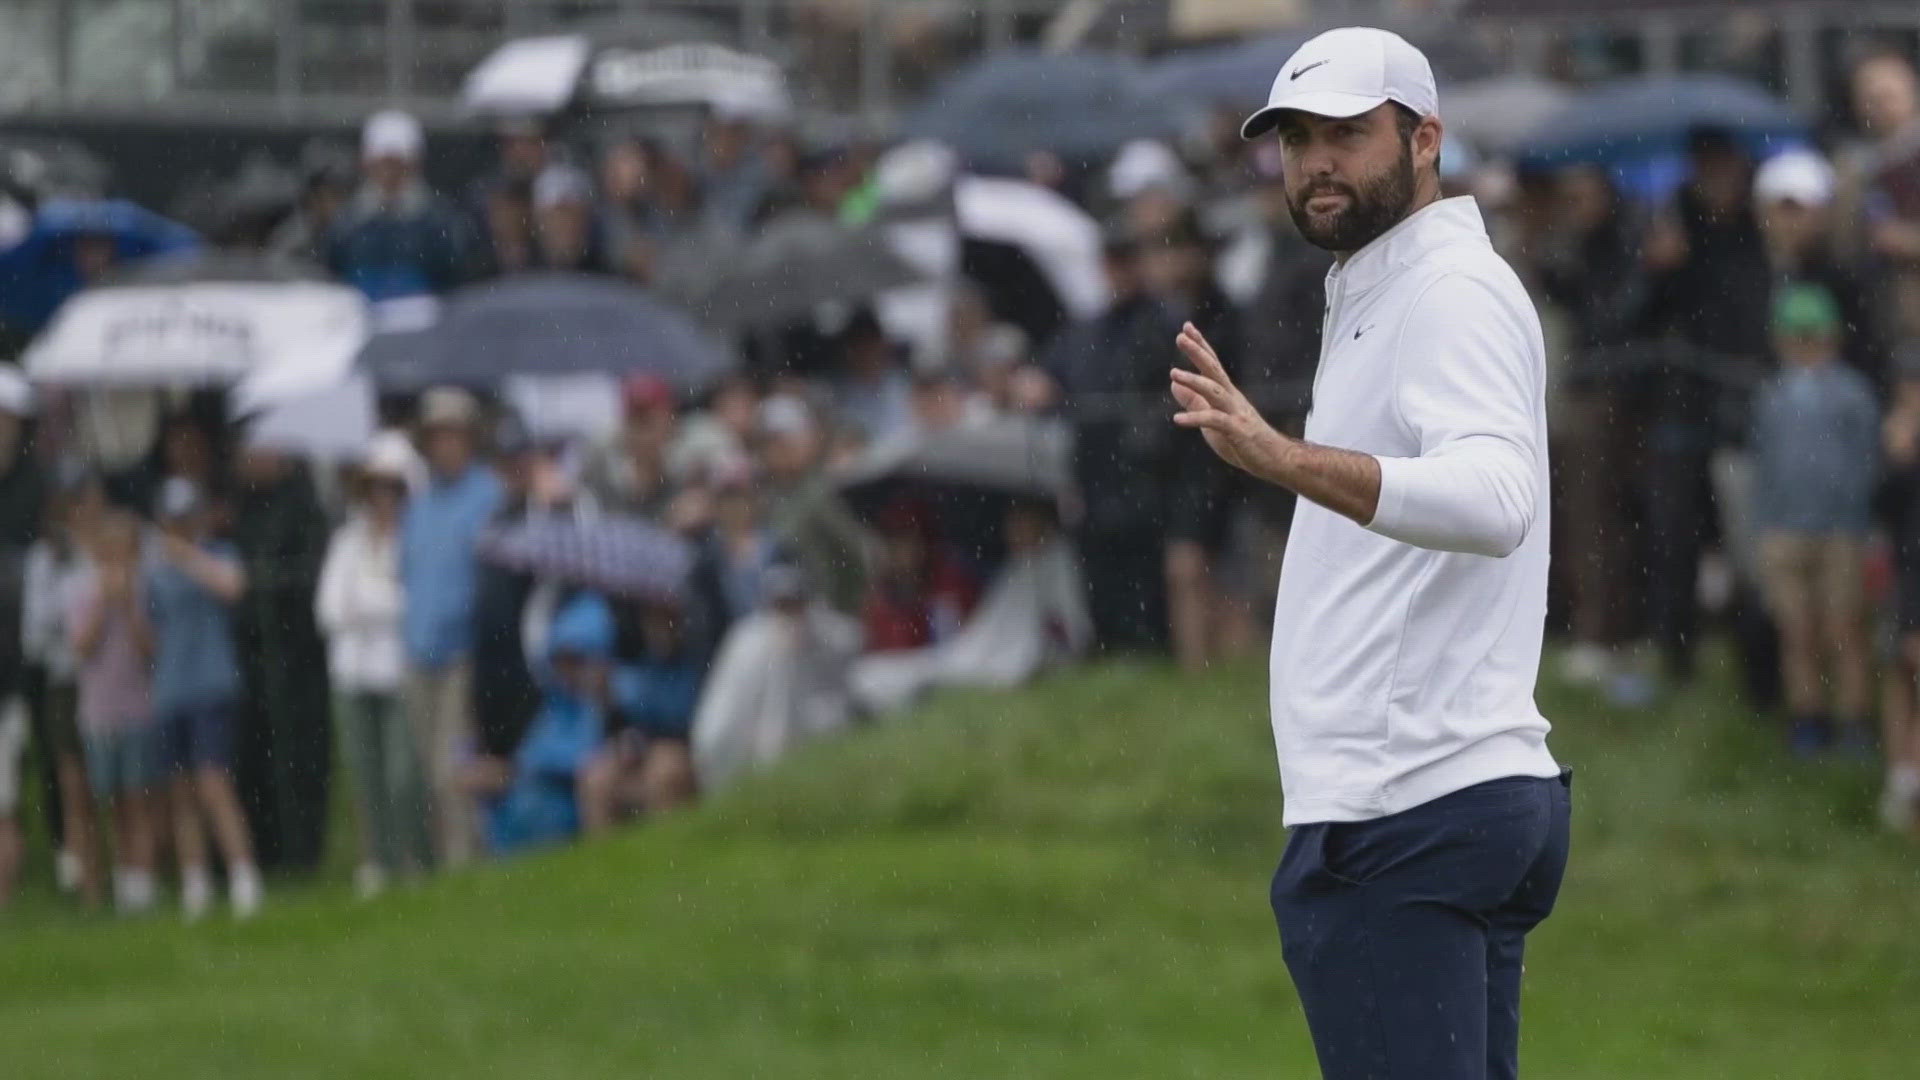 Other players described trying to get into the course on Friday as "chaotic."